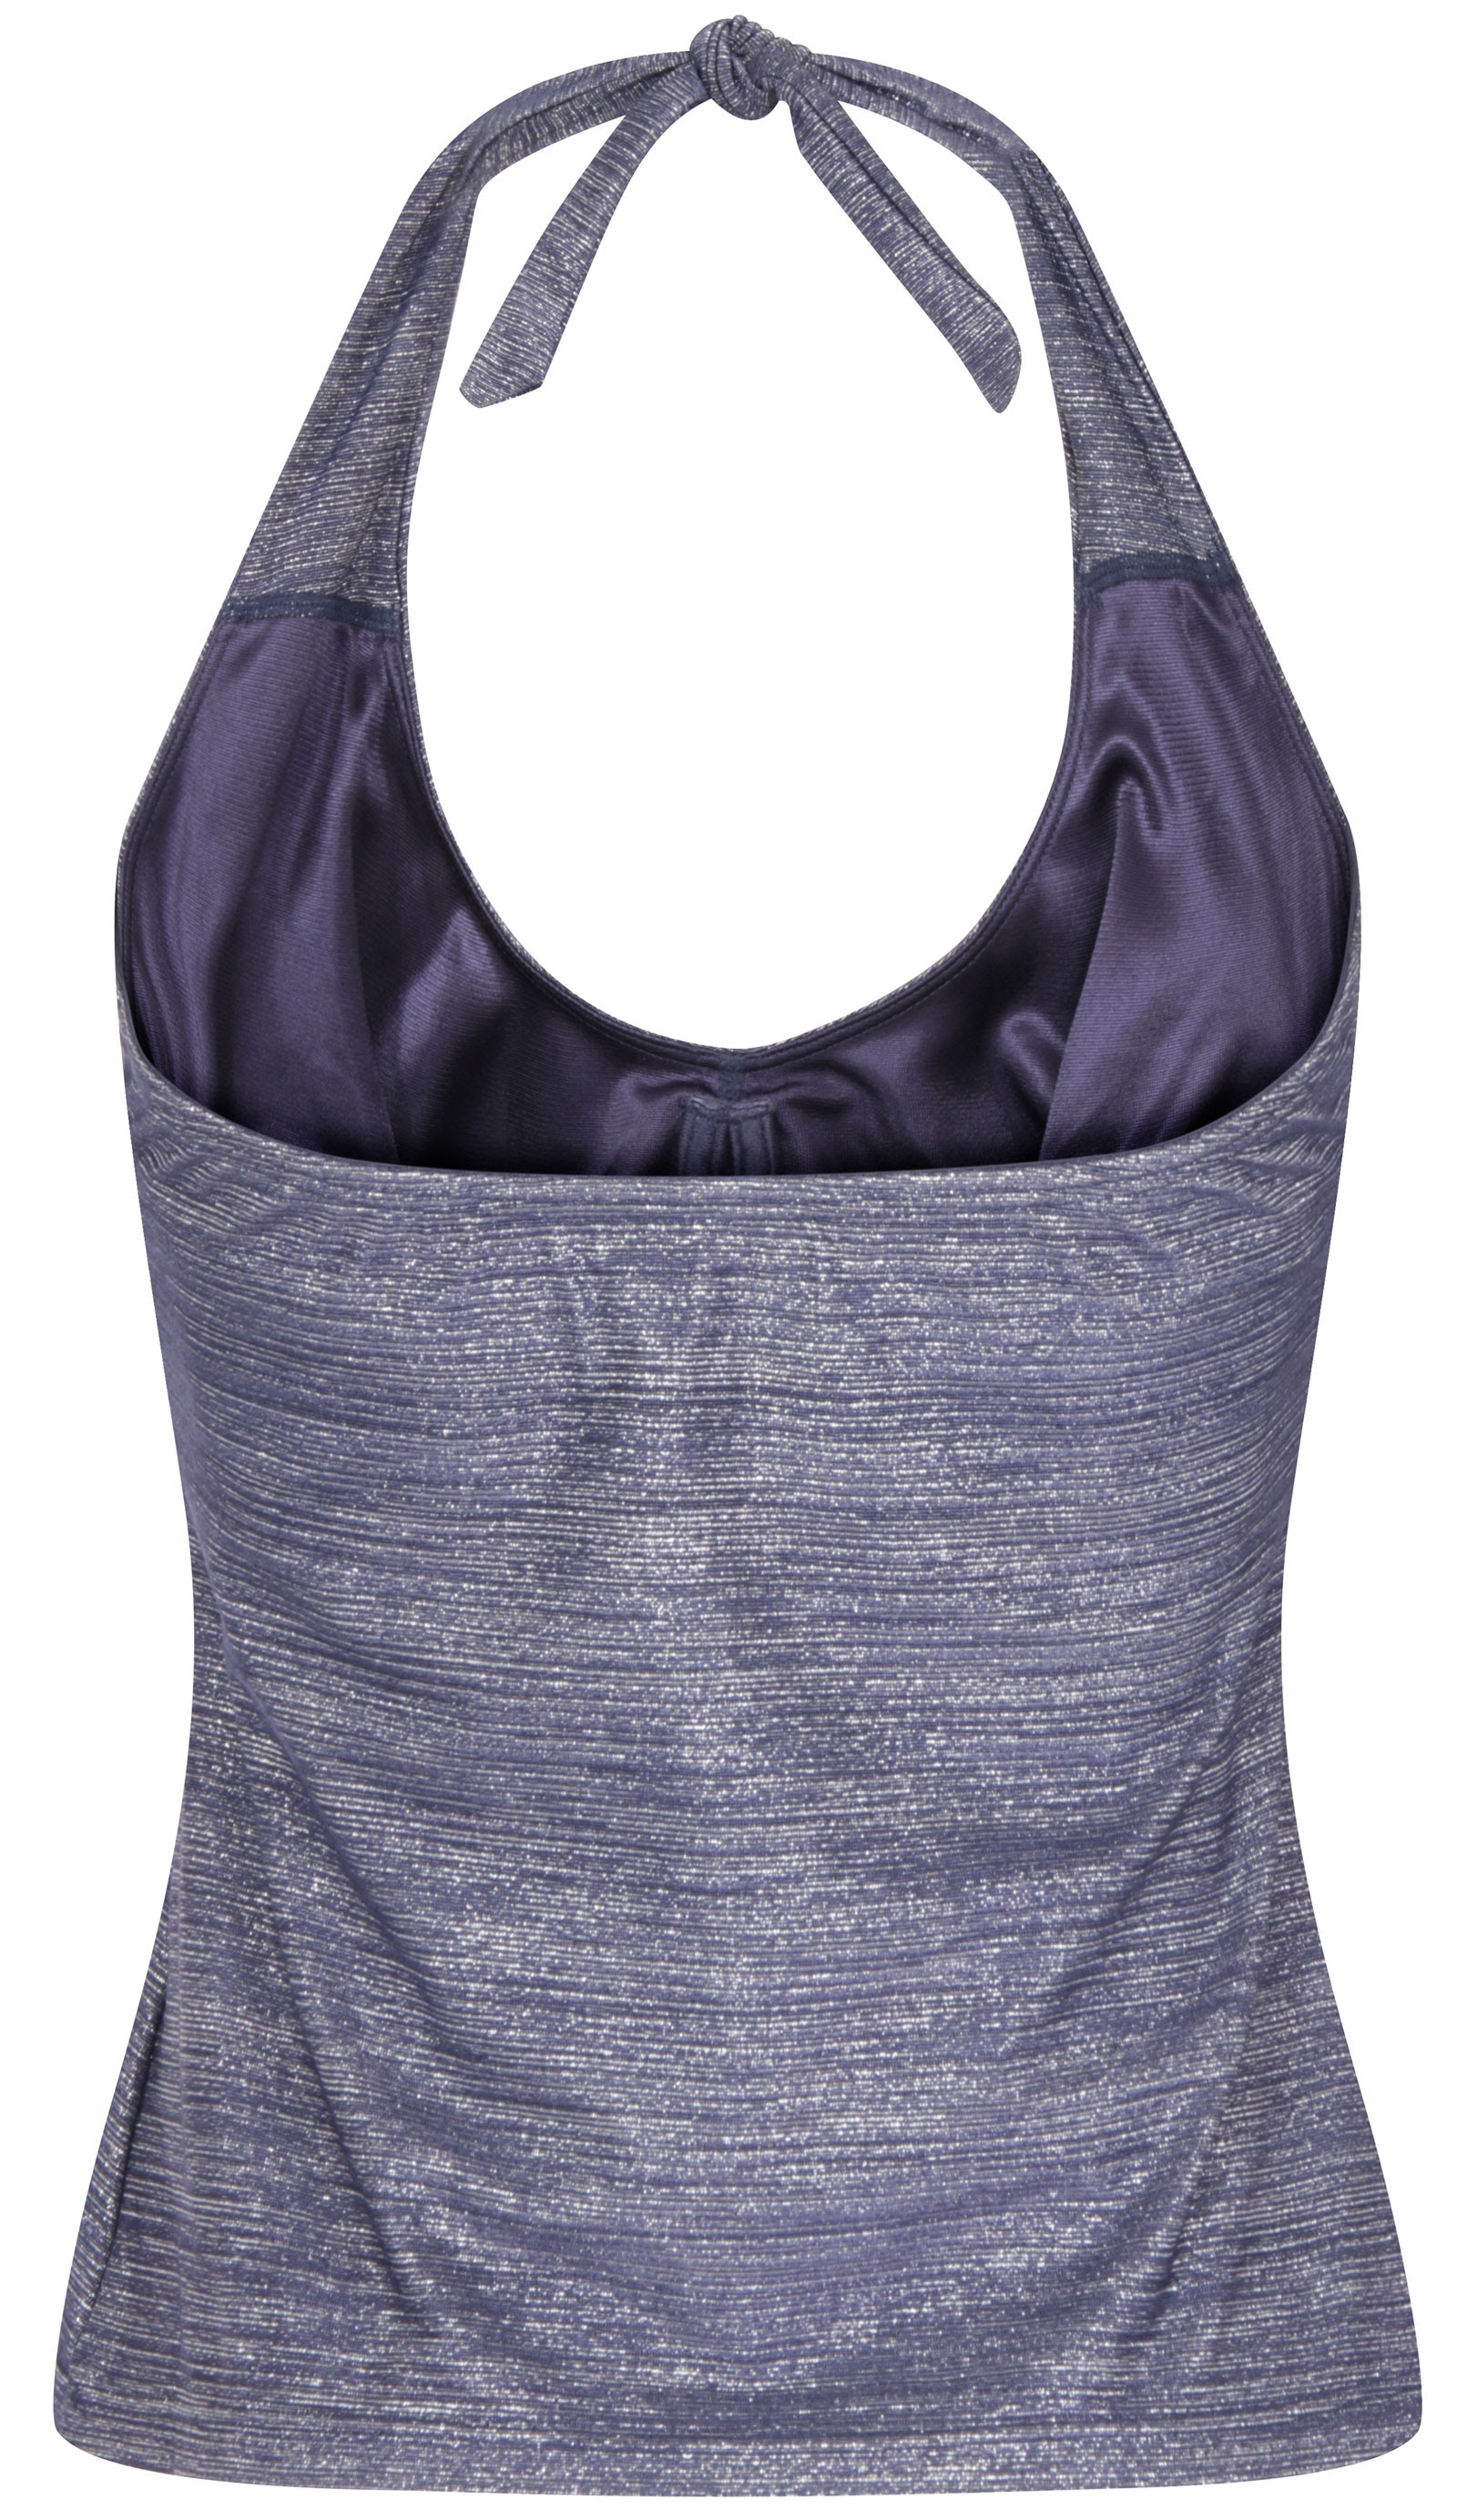 Womens vest tops with built in bra - Susanville Сlick here pictures and ...